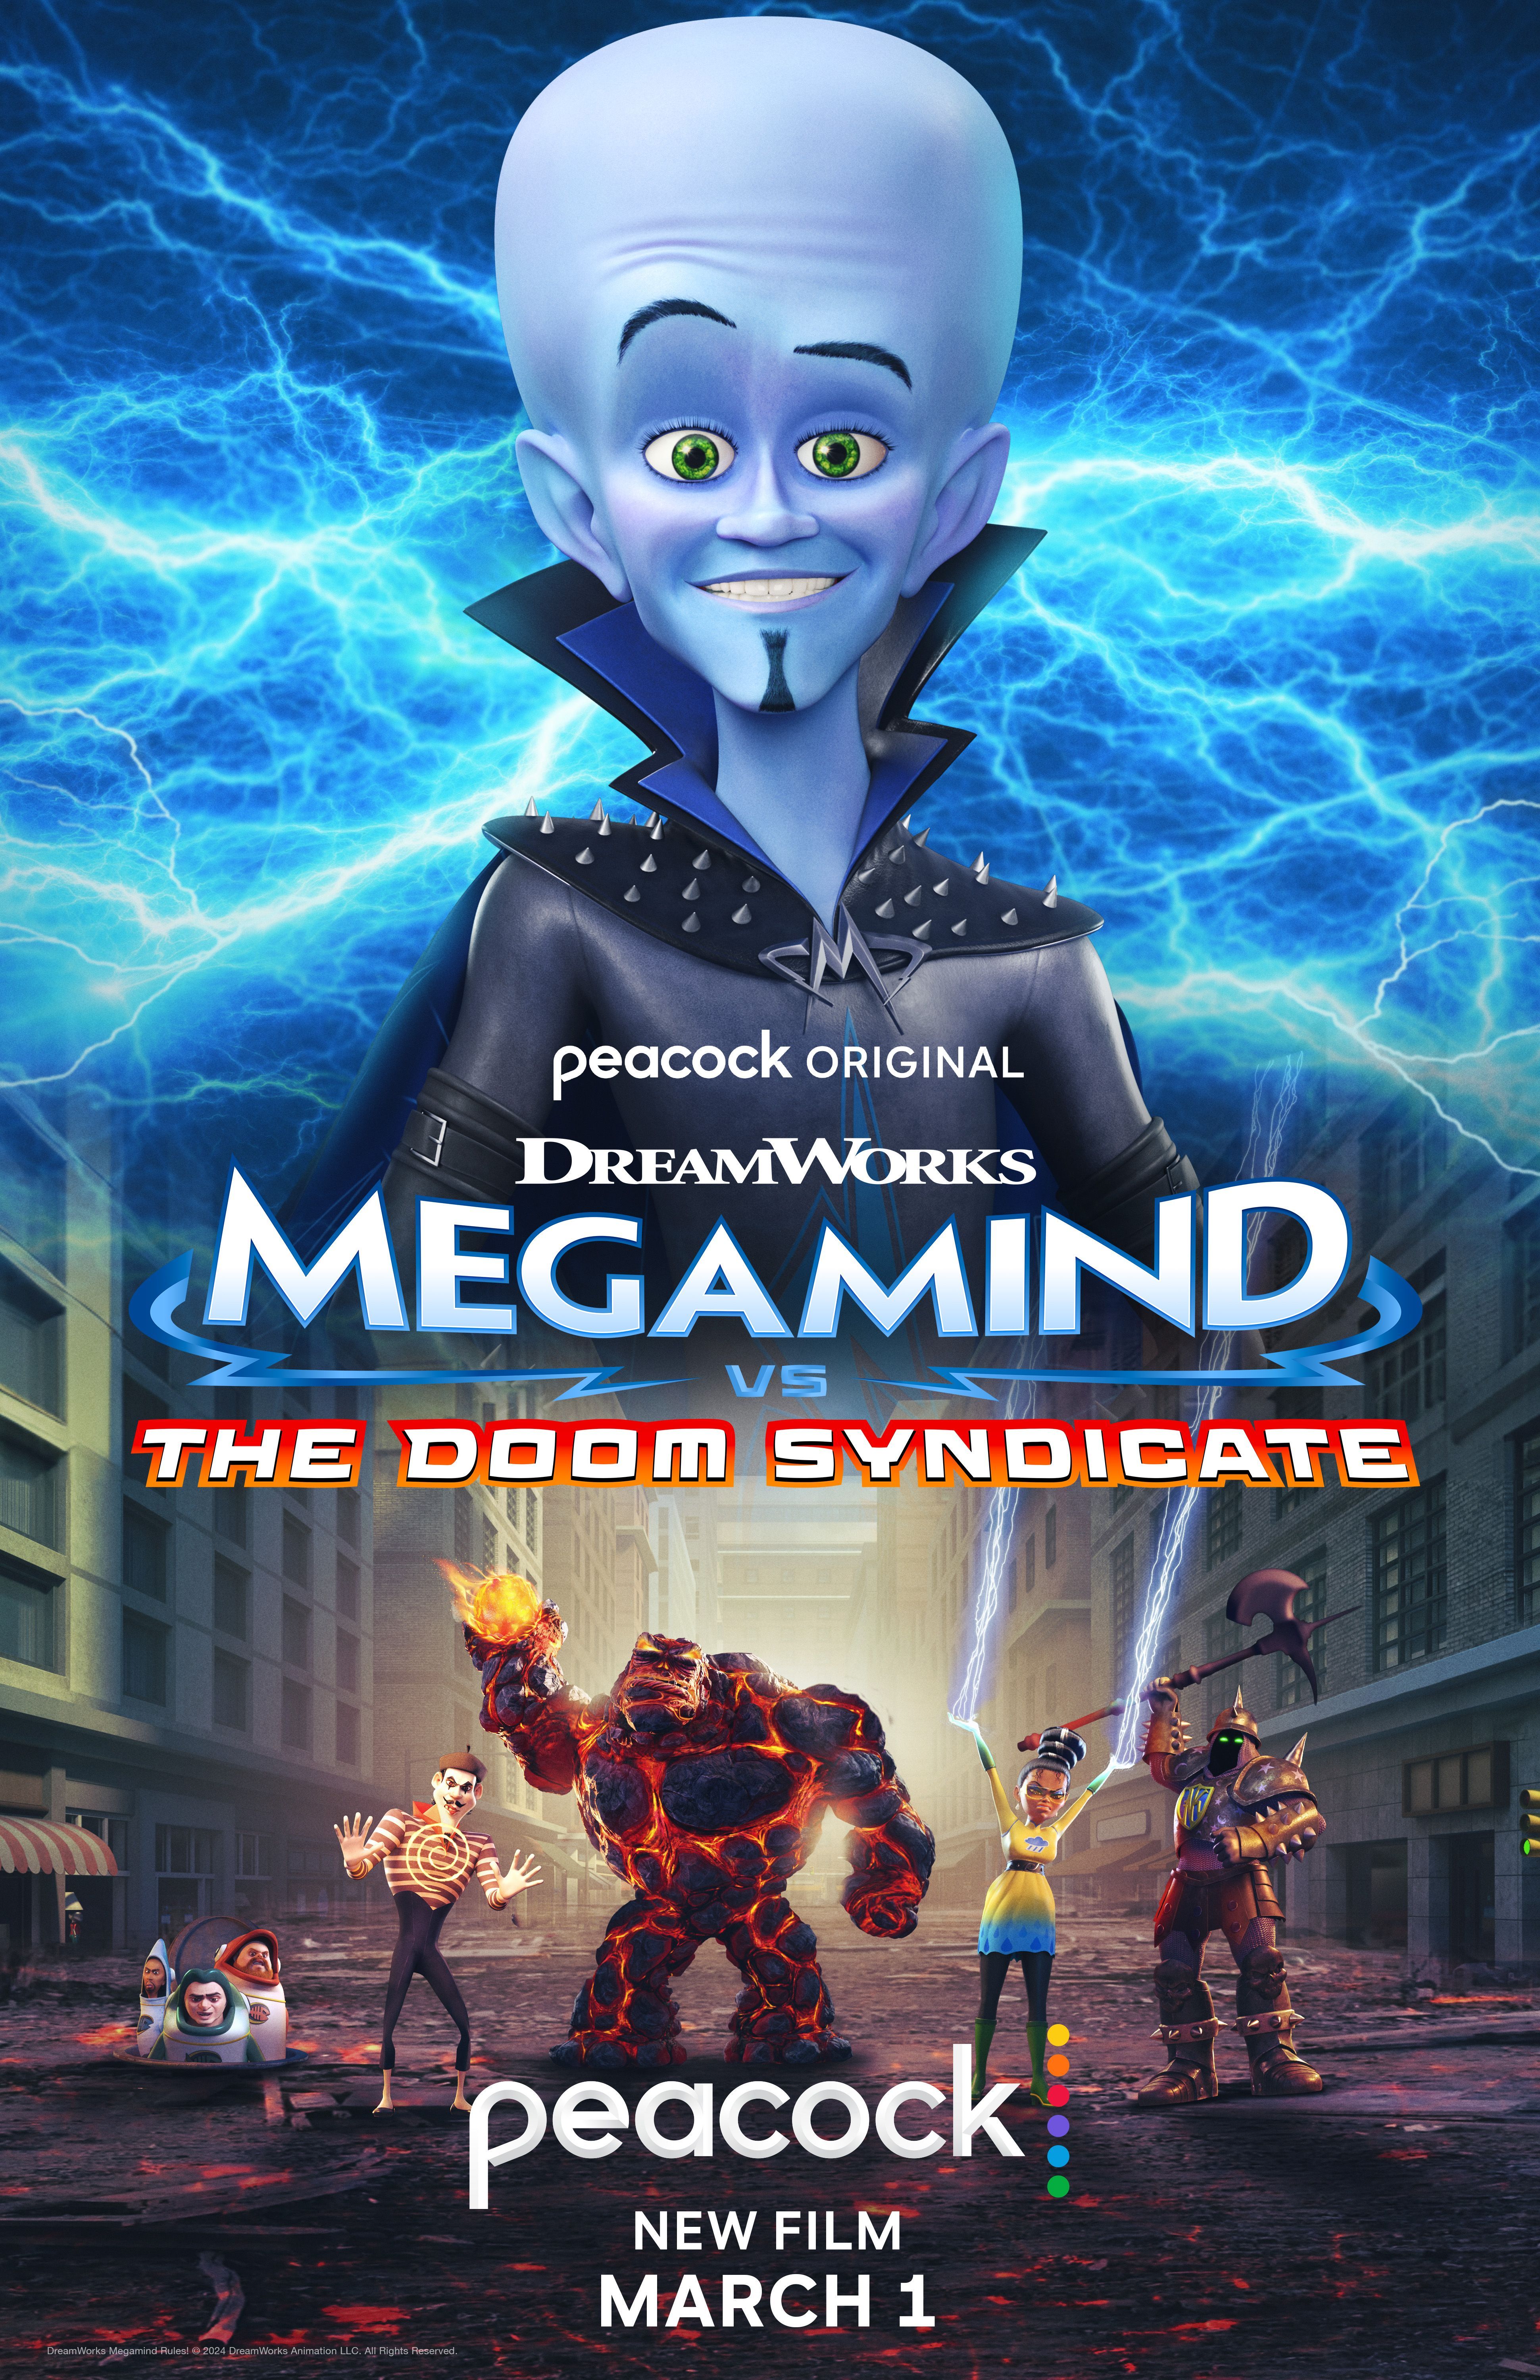 Megamind 2 Director Addresses the Panned Sequel's Challenges